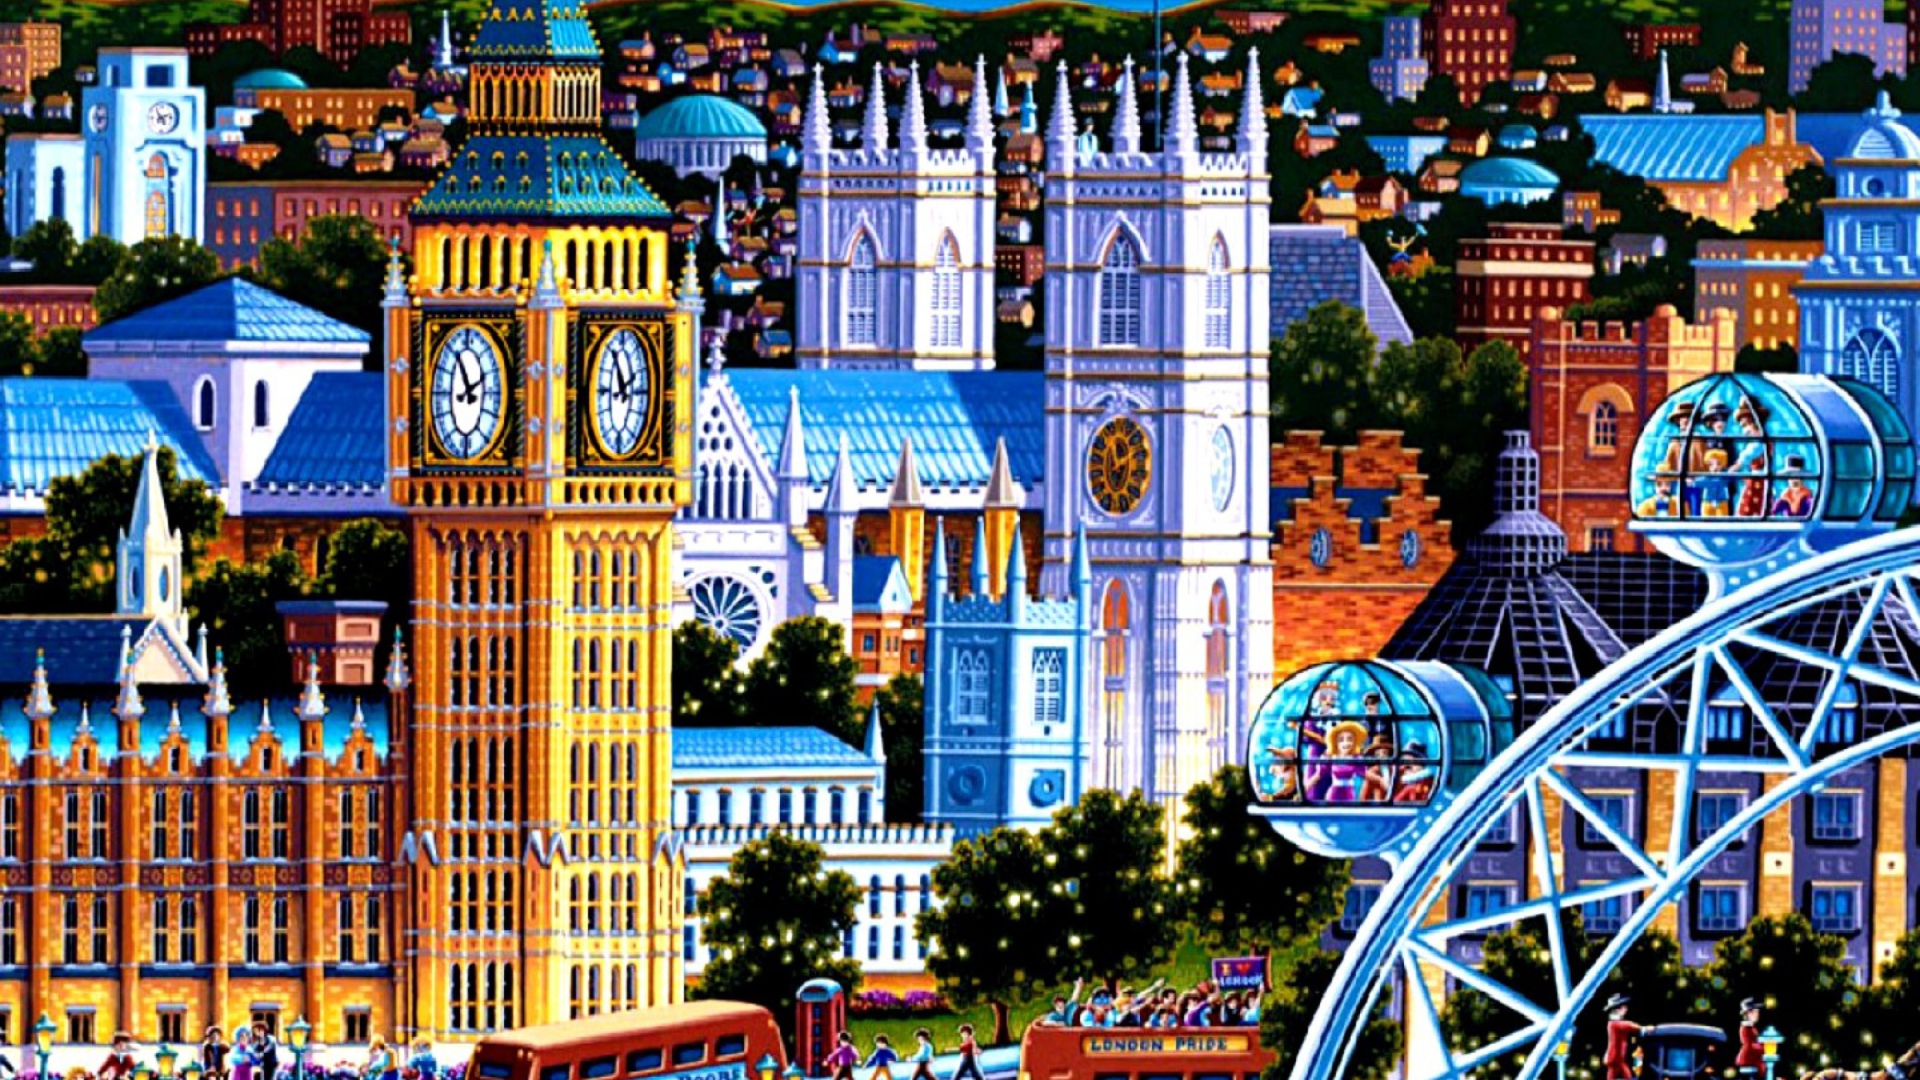 Life In The City wallpaper 1920x1080